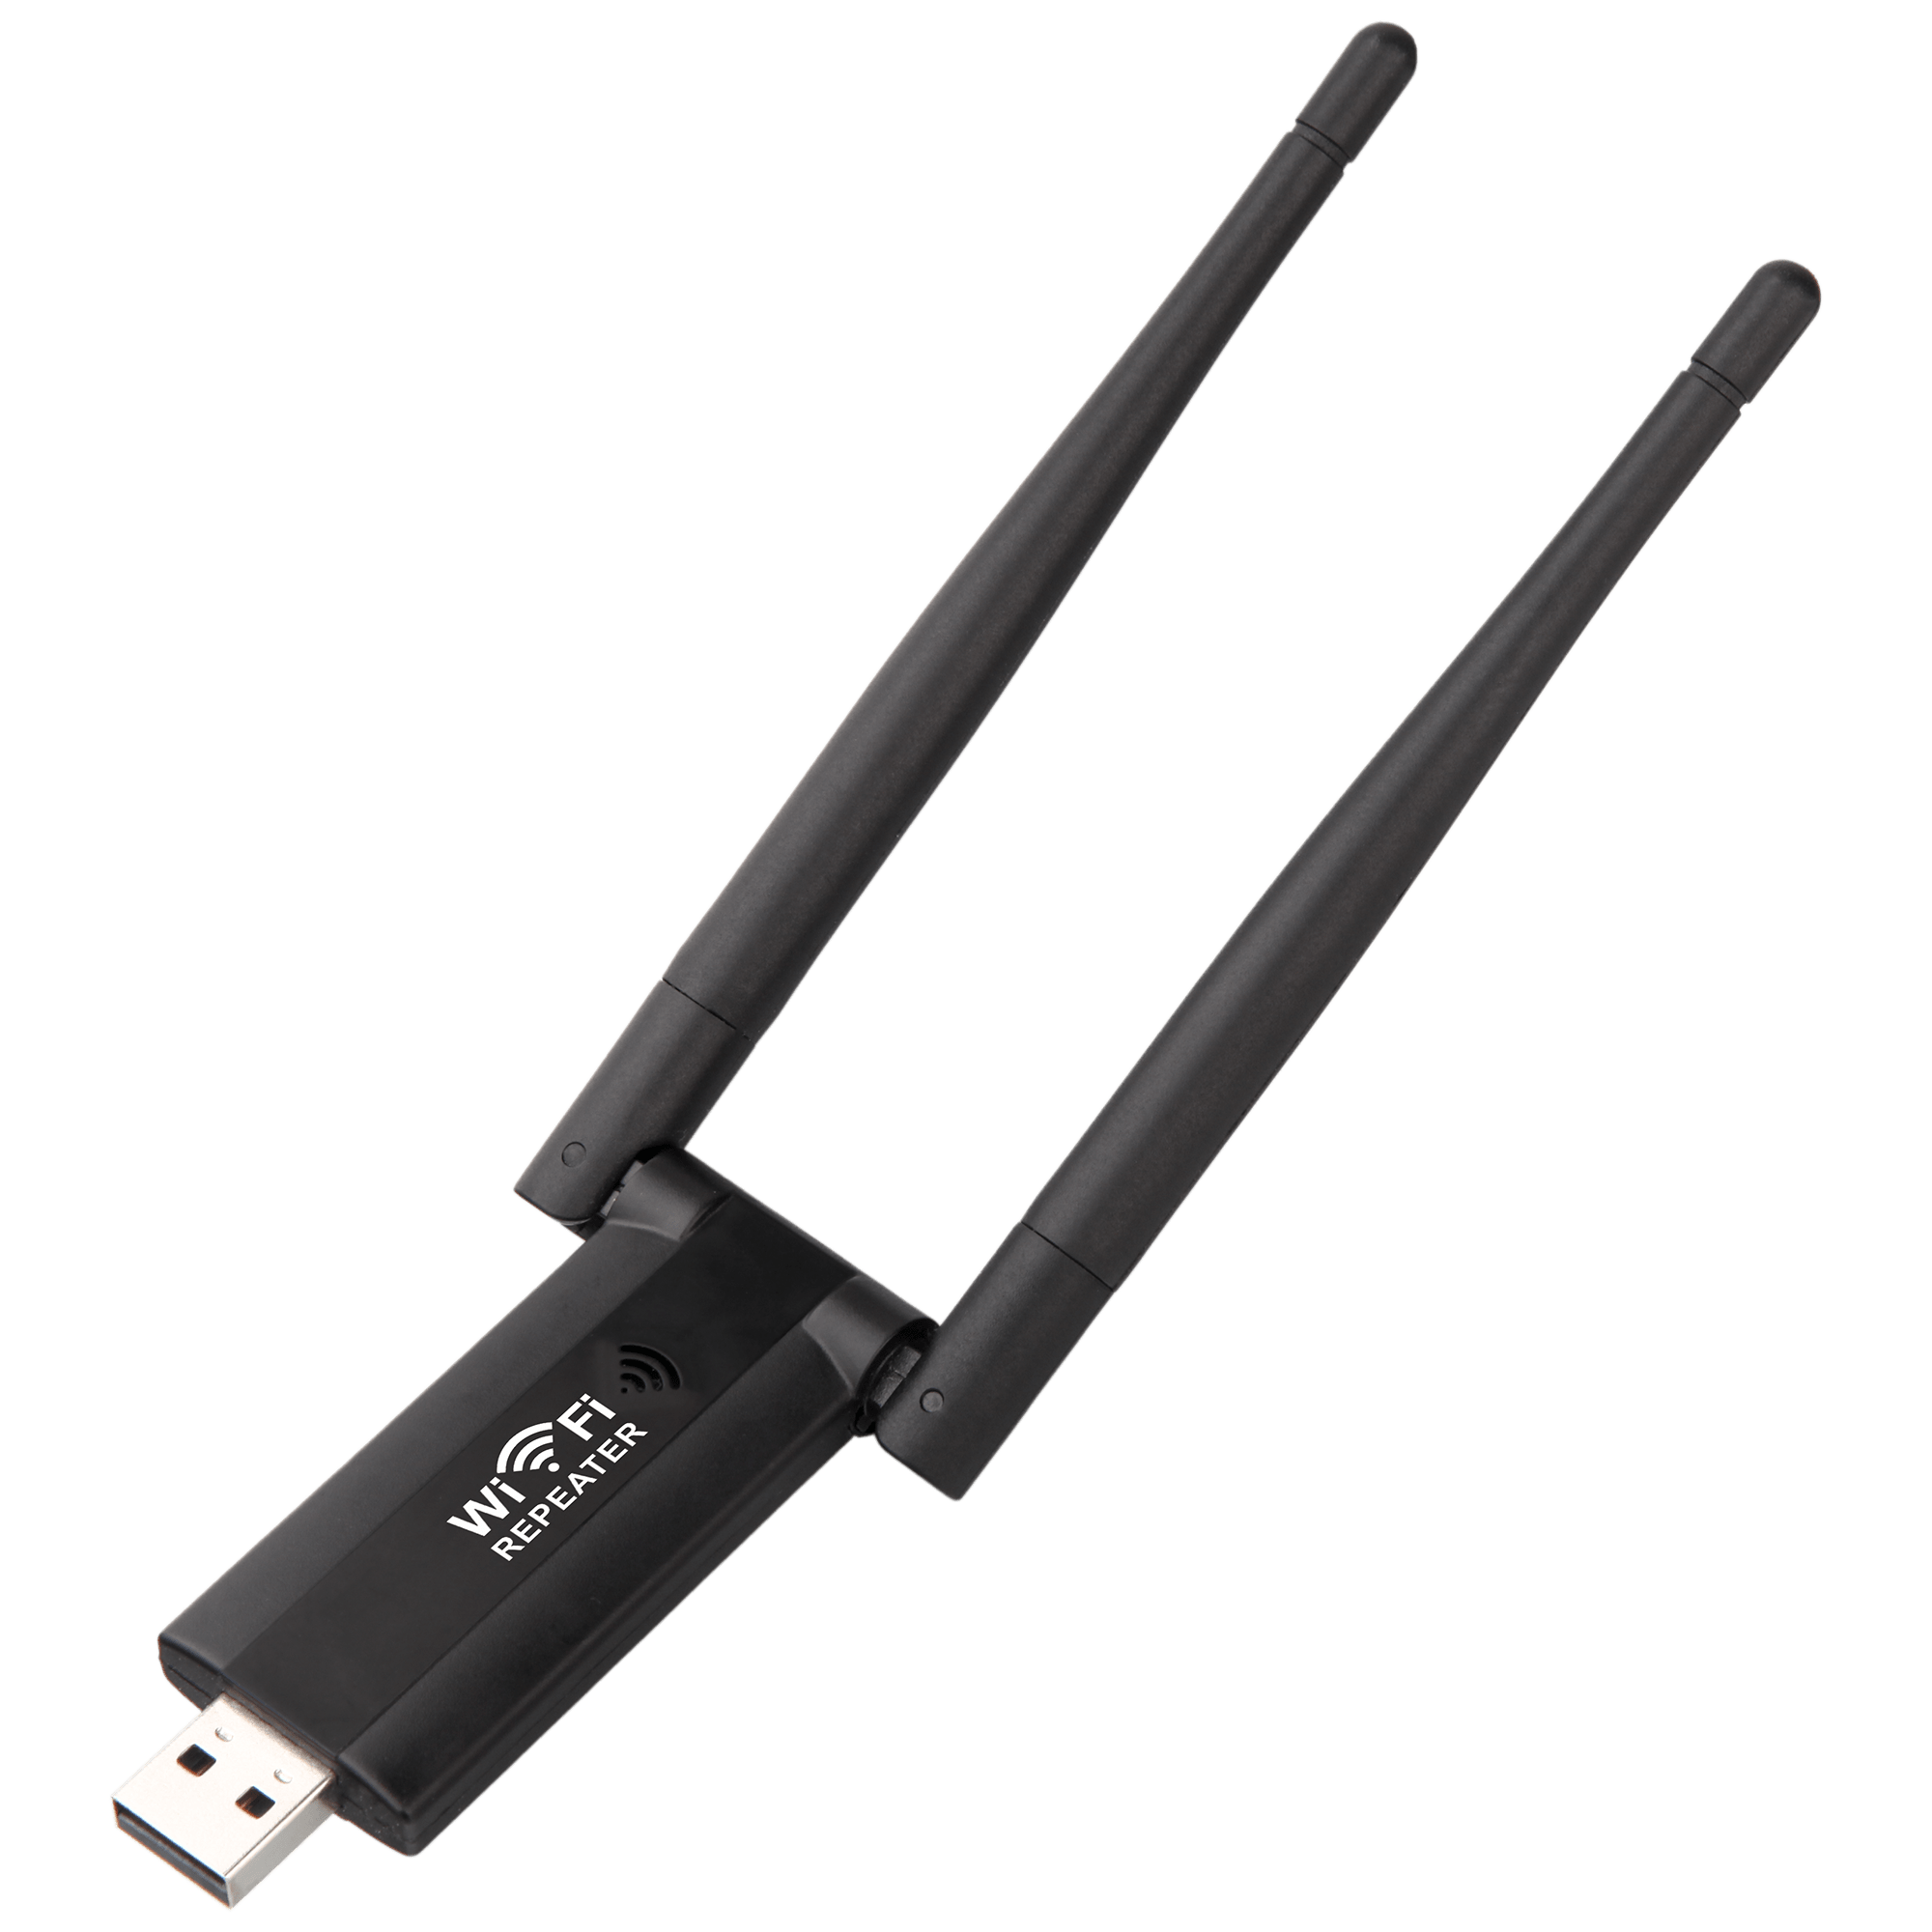  Nineplus Wireless USB WiFi Adapter for PC - 1300Mbps Dual 5Dbi  Antennas 5G/2.4G WiFi Adapter for Desktop PC Laptop  Windows11/10/8/7/Vista/XP, Wireless Adapter for Desktop Computer Network  Adapters : Electronics